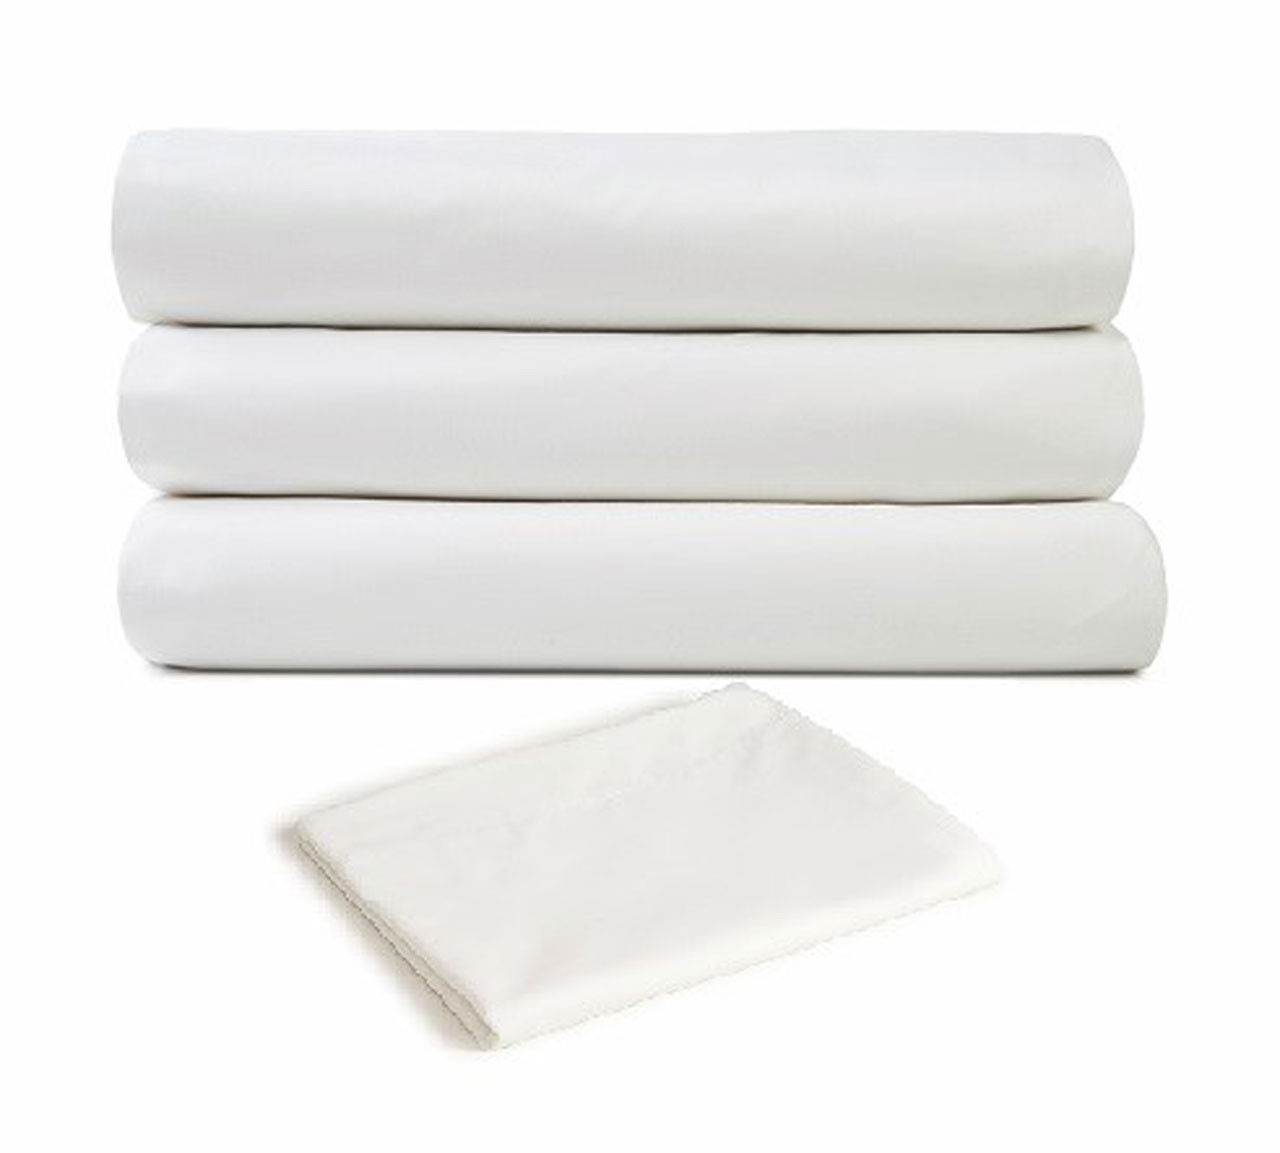 Is the T310 Premium Bed Sheets' pattern on 60/40 cotton poly blend fabric?